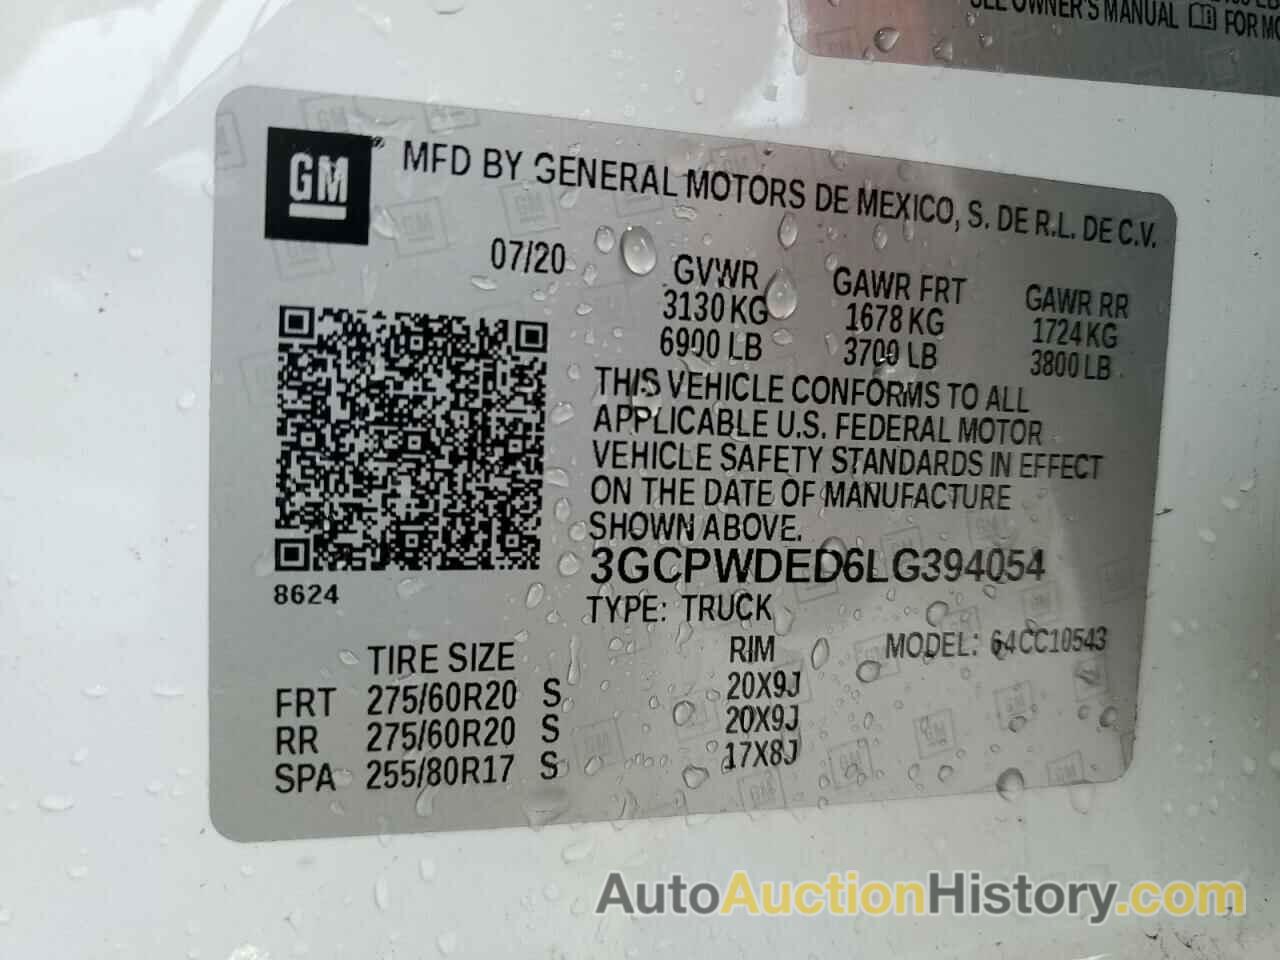 CHEVROLET ALL Models C1500 RST, 3GCPWDED6LG394054